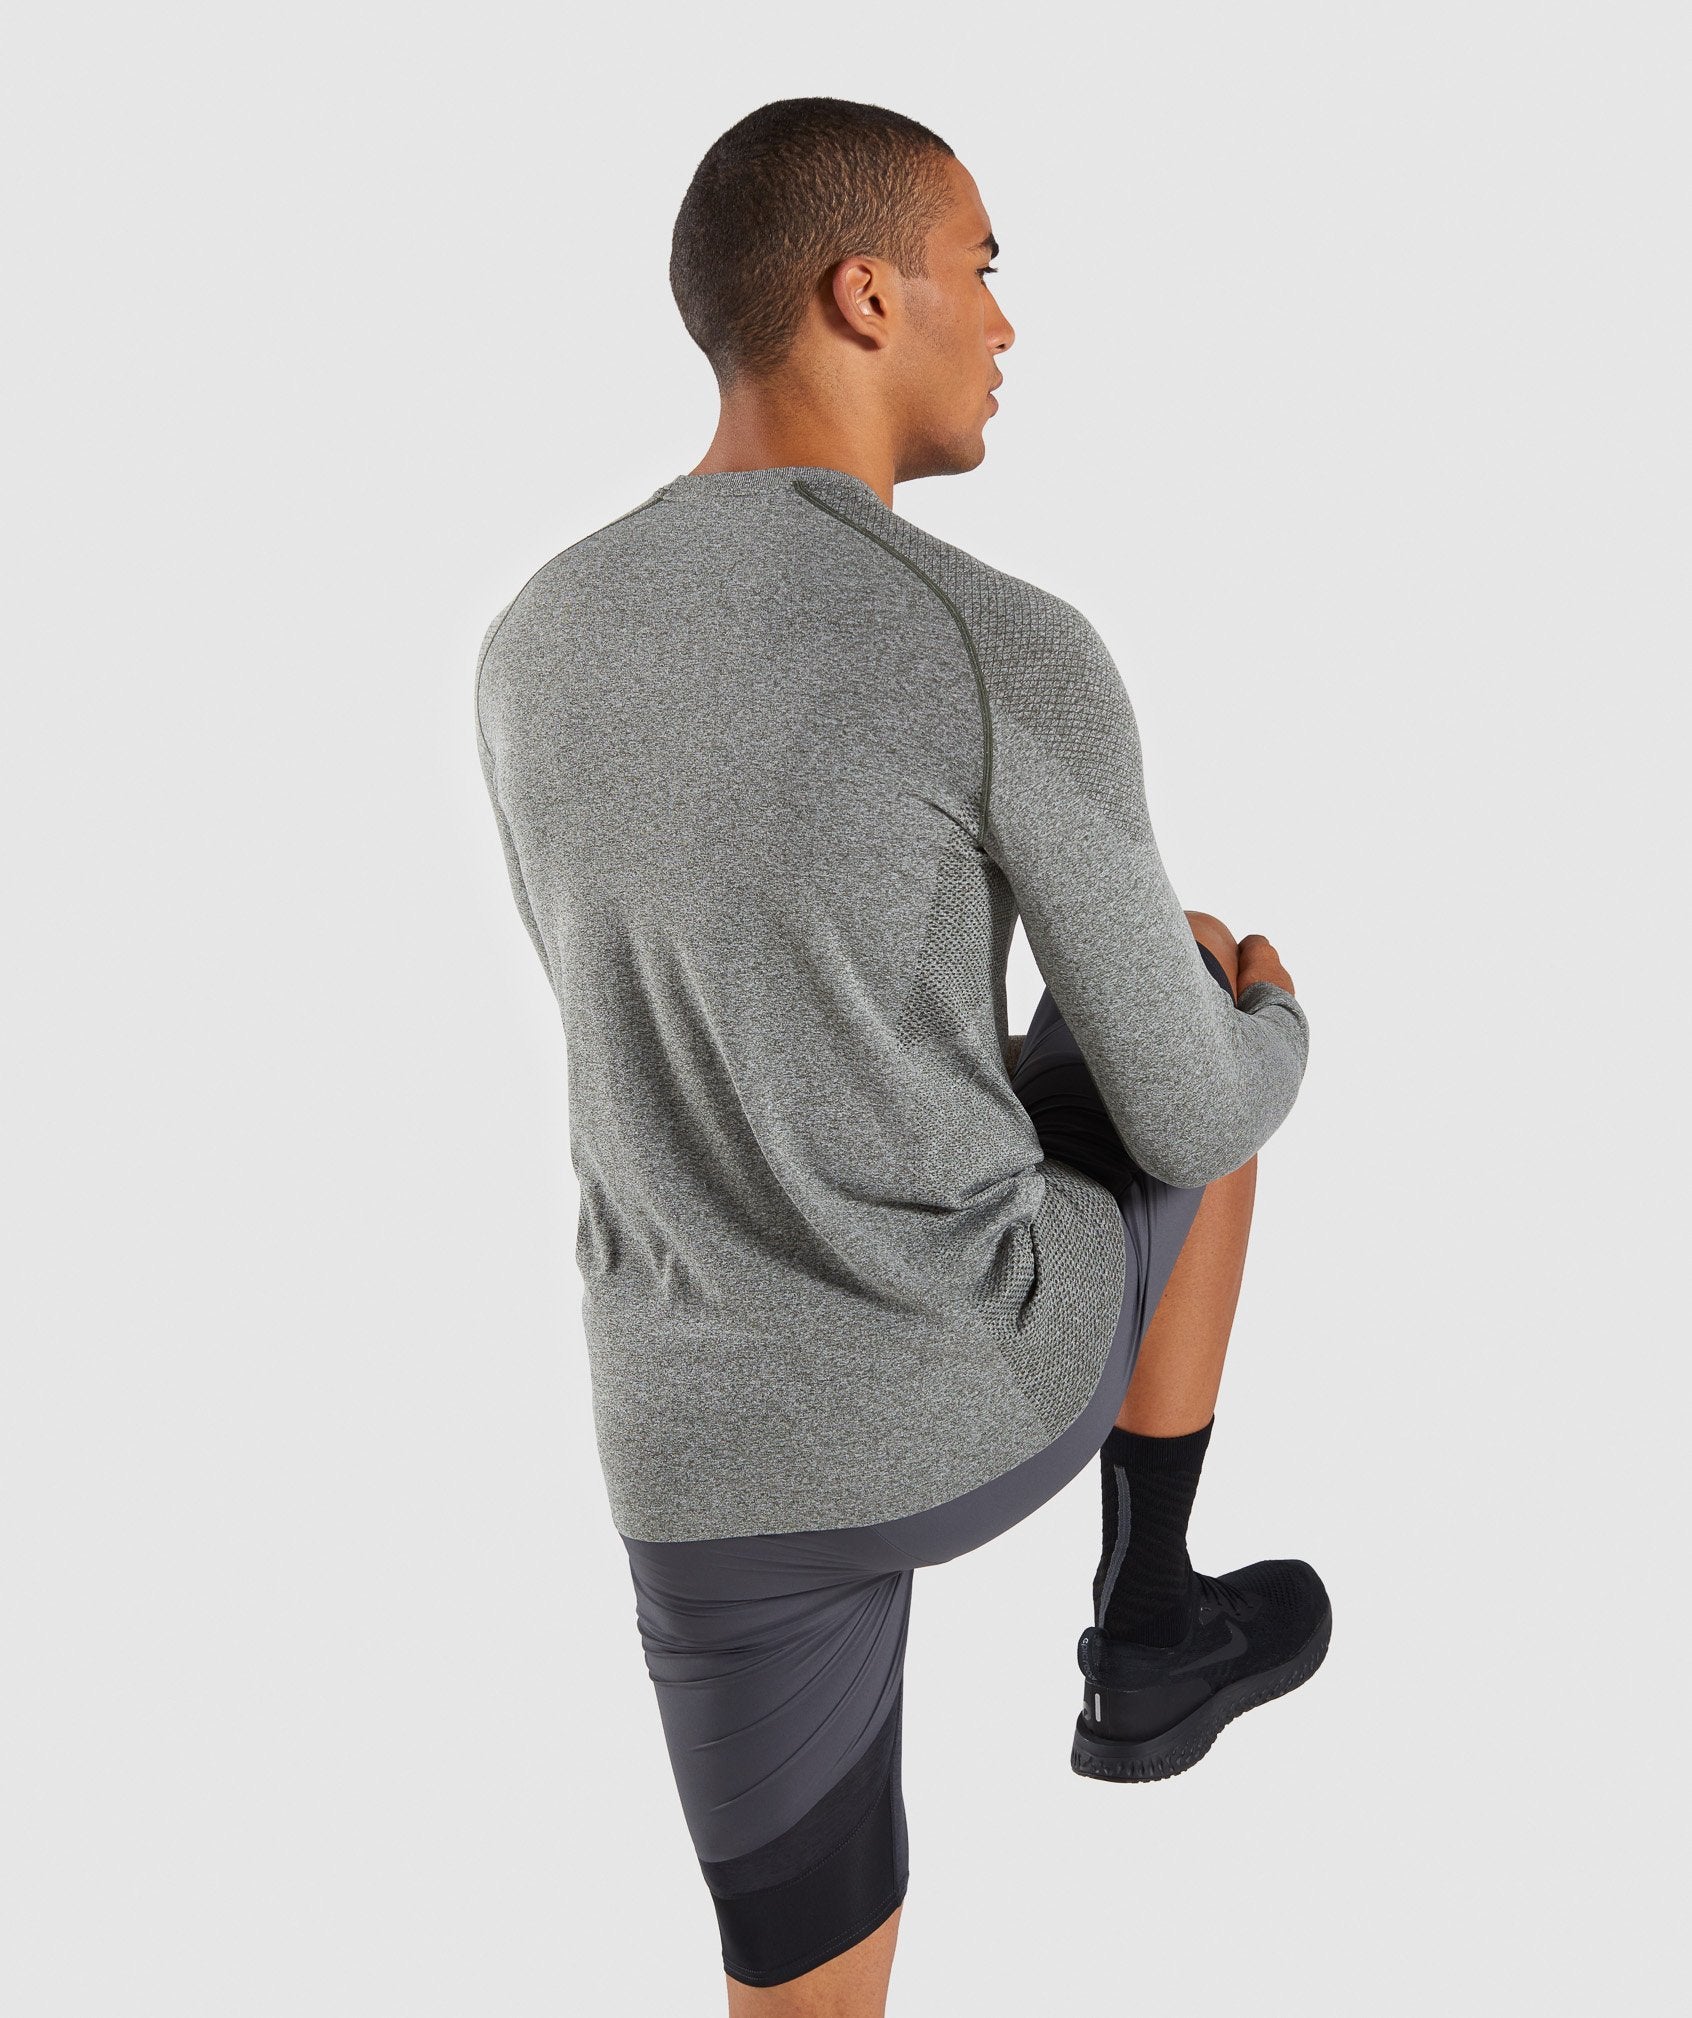 Define Seamless Long Sleeve T-Shirt in Woodland Green Marl - view 2